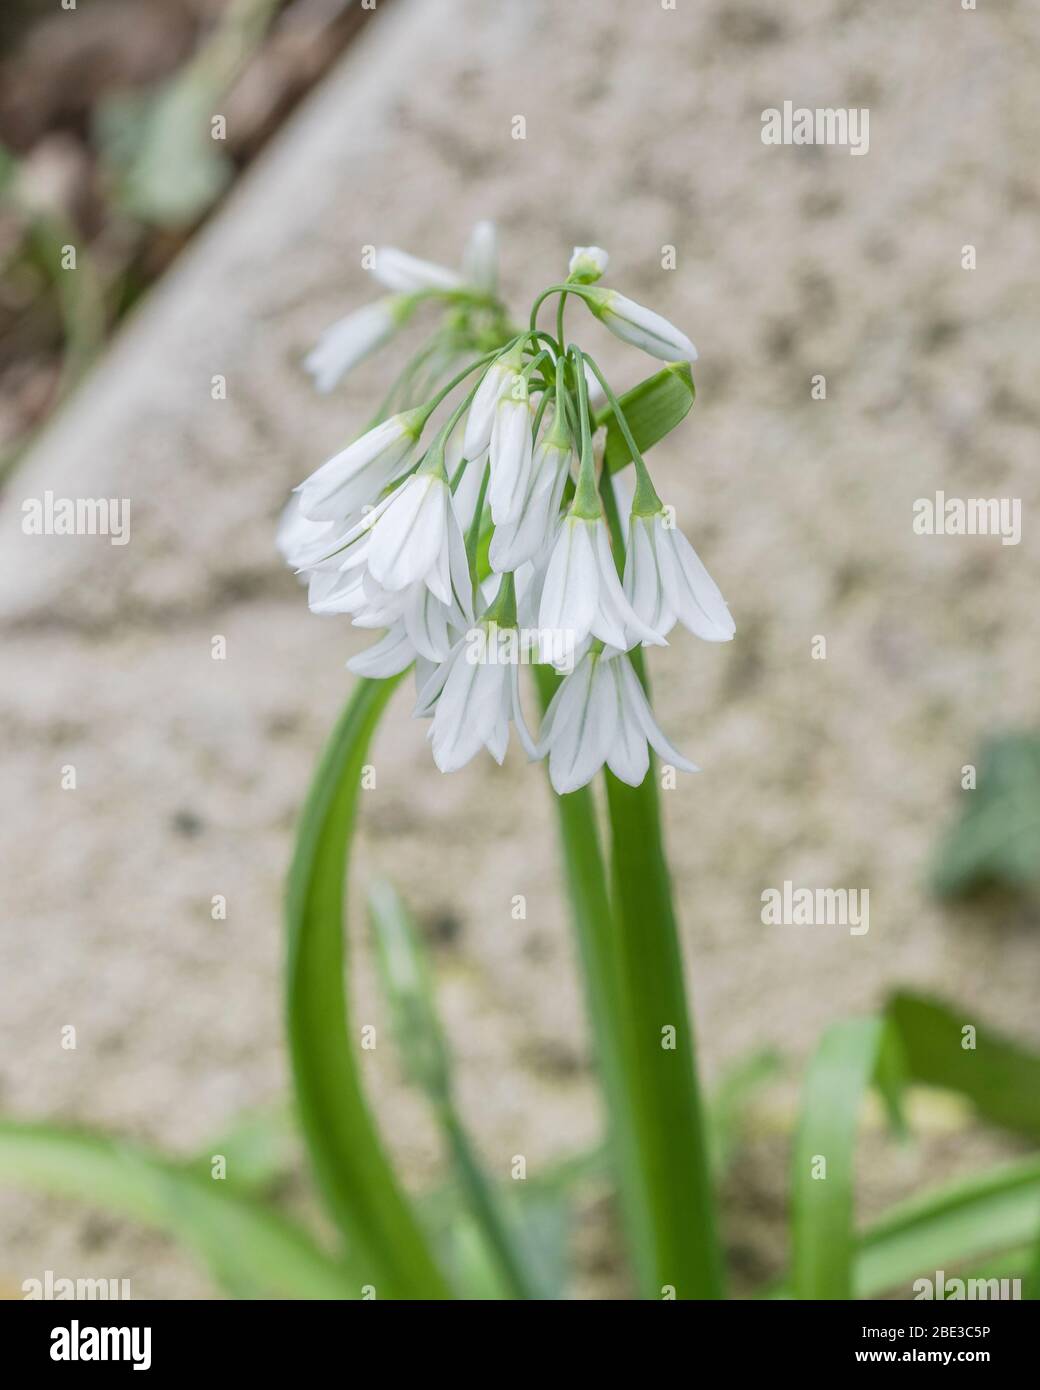 Close shot of white flowers of Three-cornered Leek / Allium triquetrum, a wild member of the Onion family which may be used a foraged food and eaten. Stock Photo